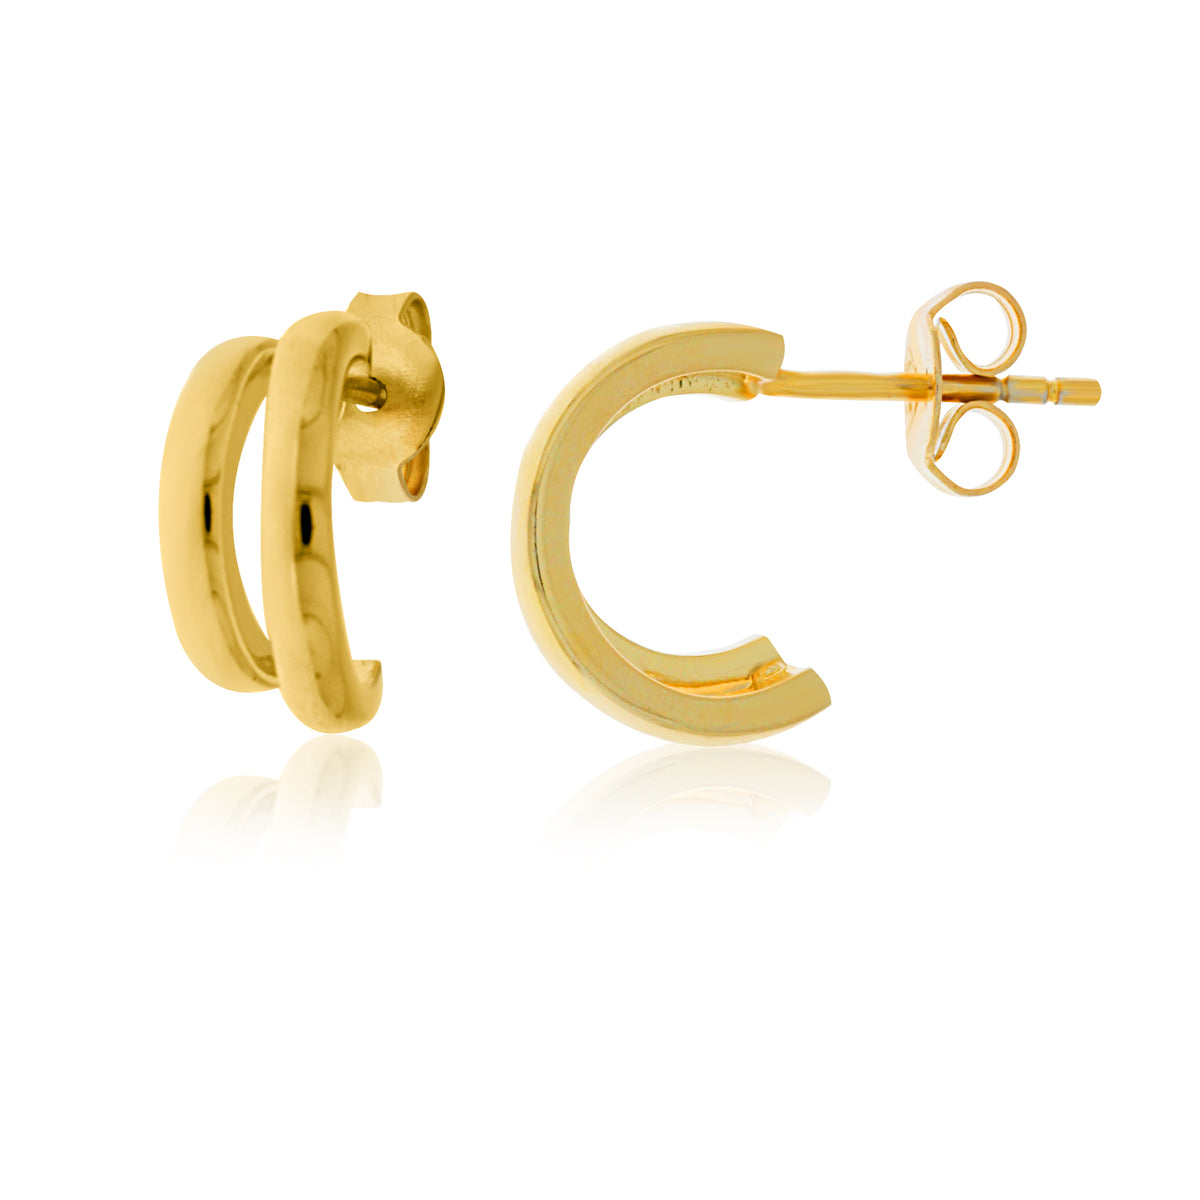 Yellow Gold Plated Stud Split Hoops